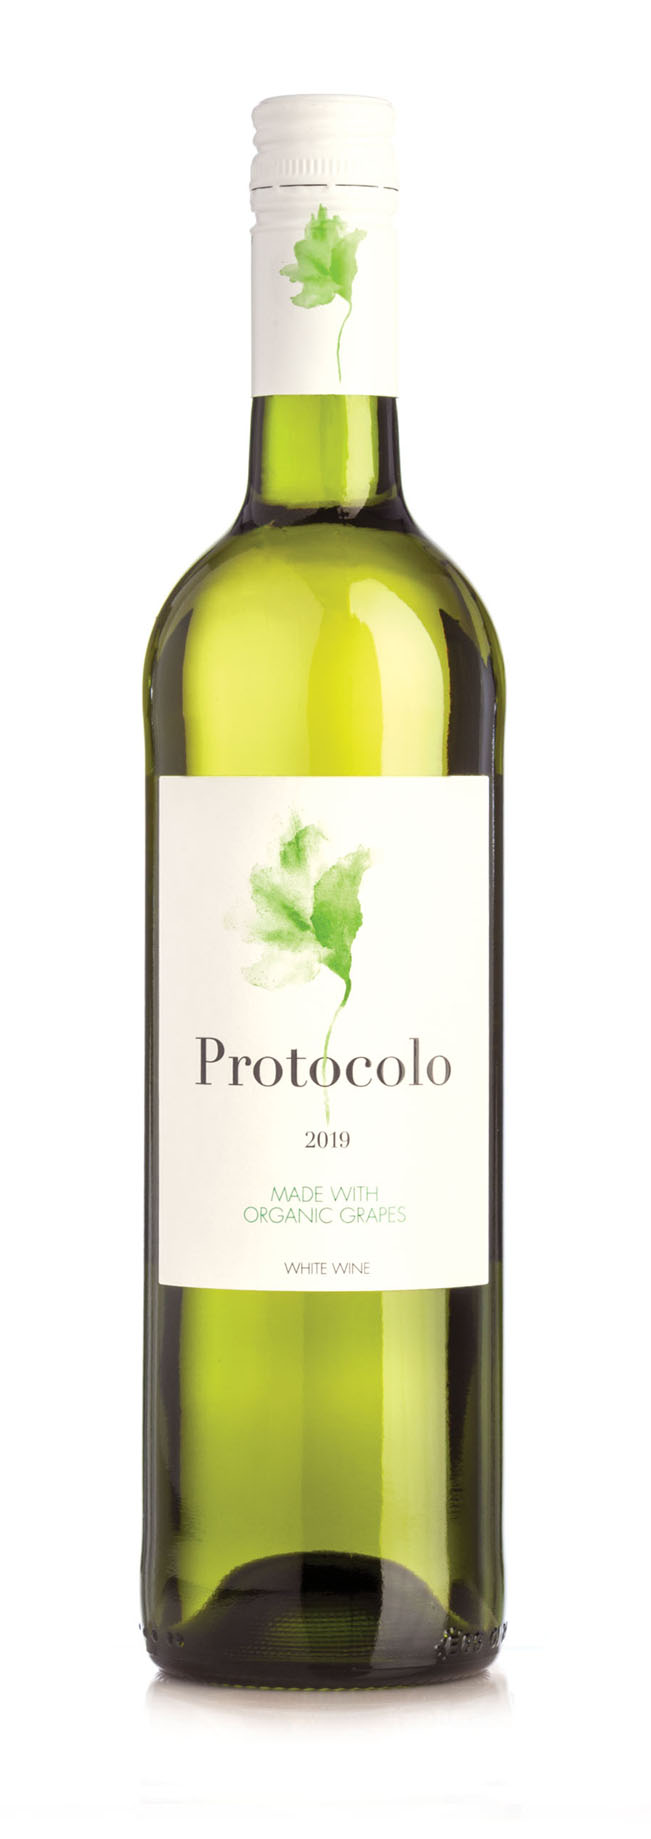 Protocolo Blanco made with Organic Grapes Bottle Photo